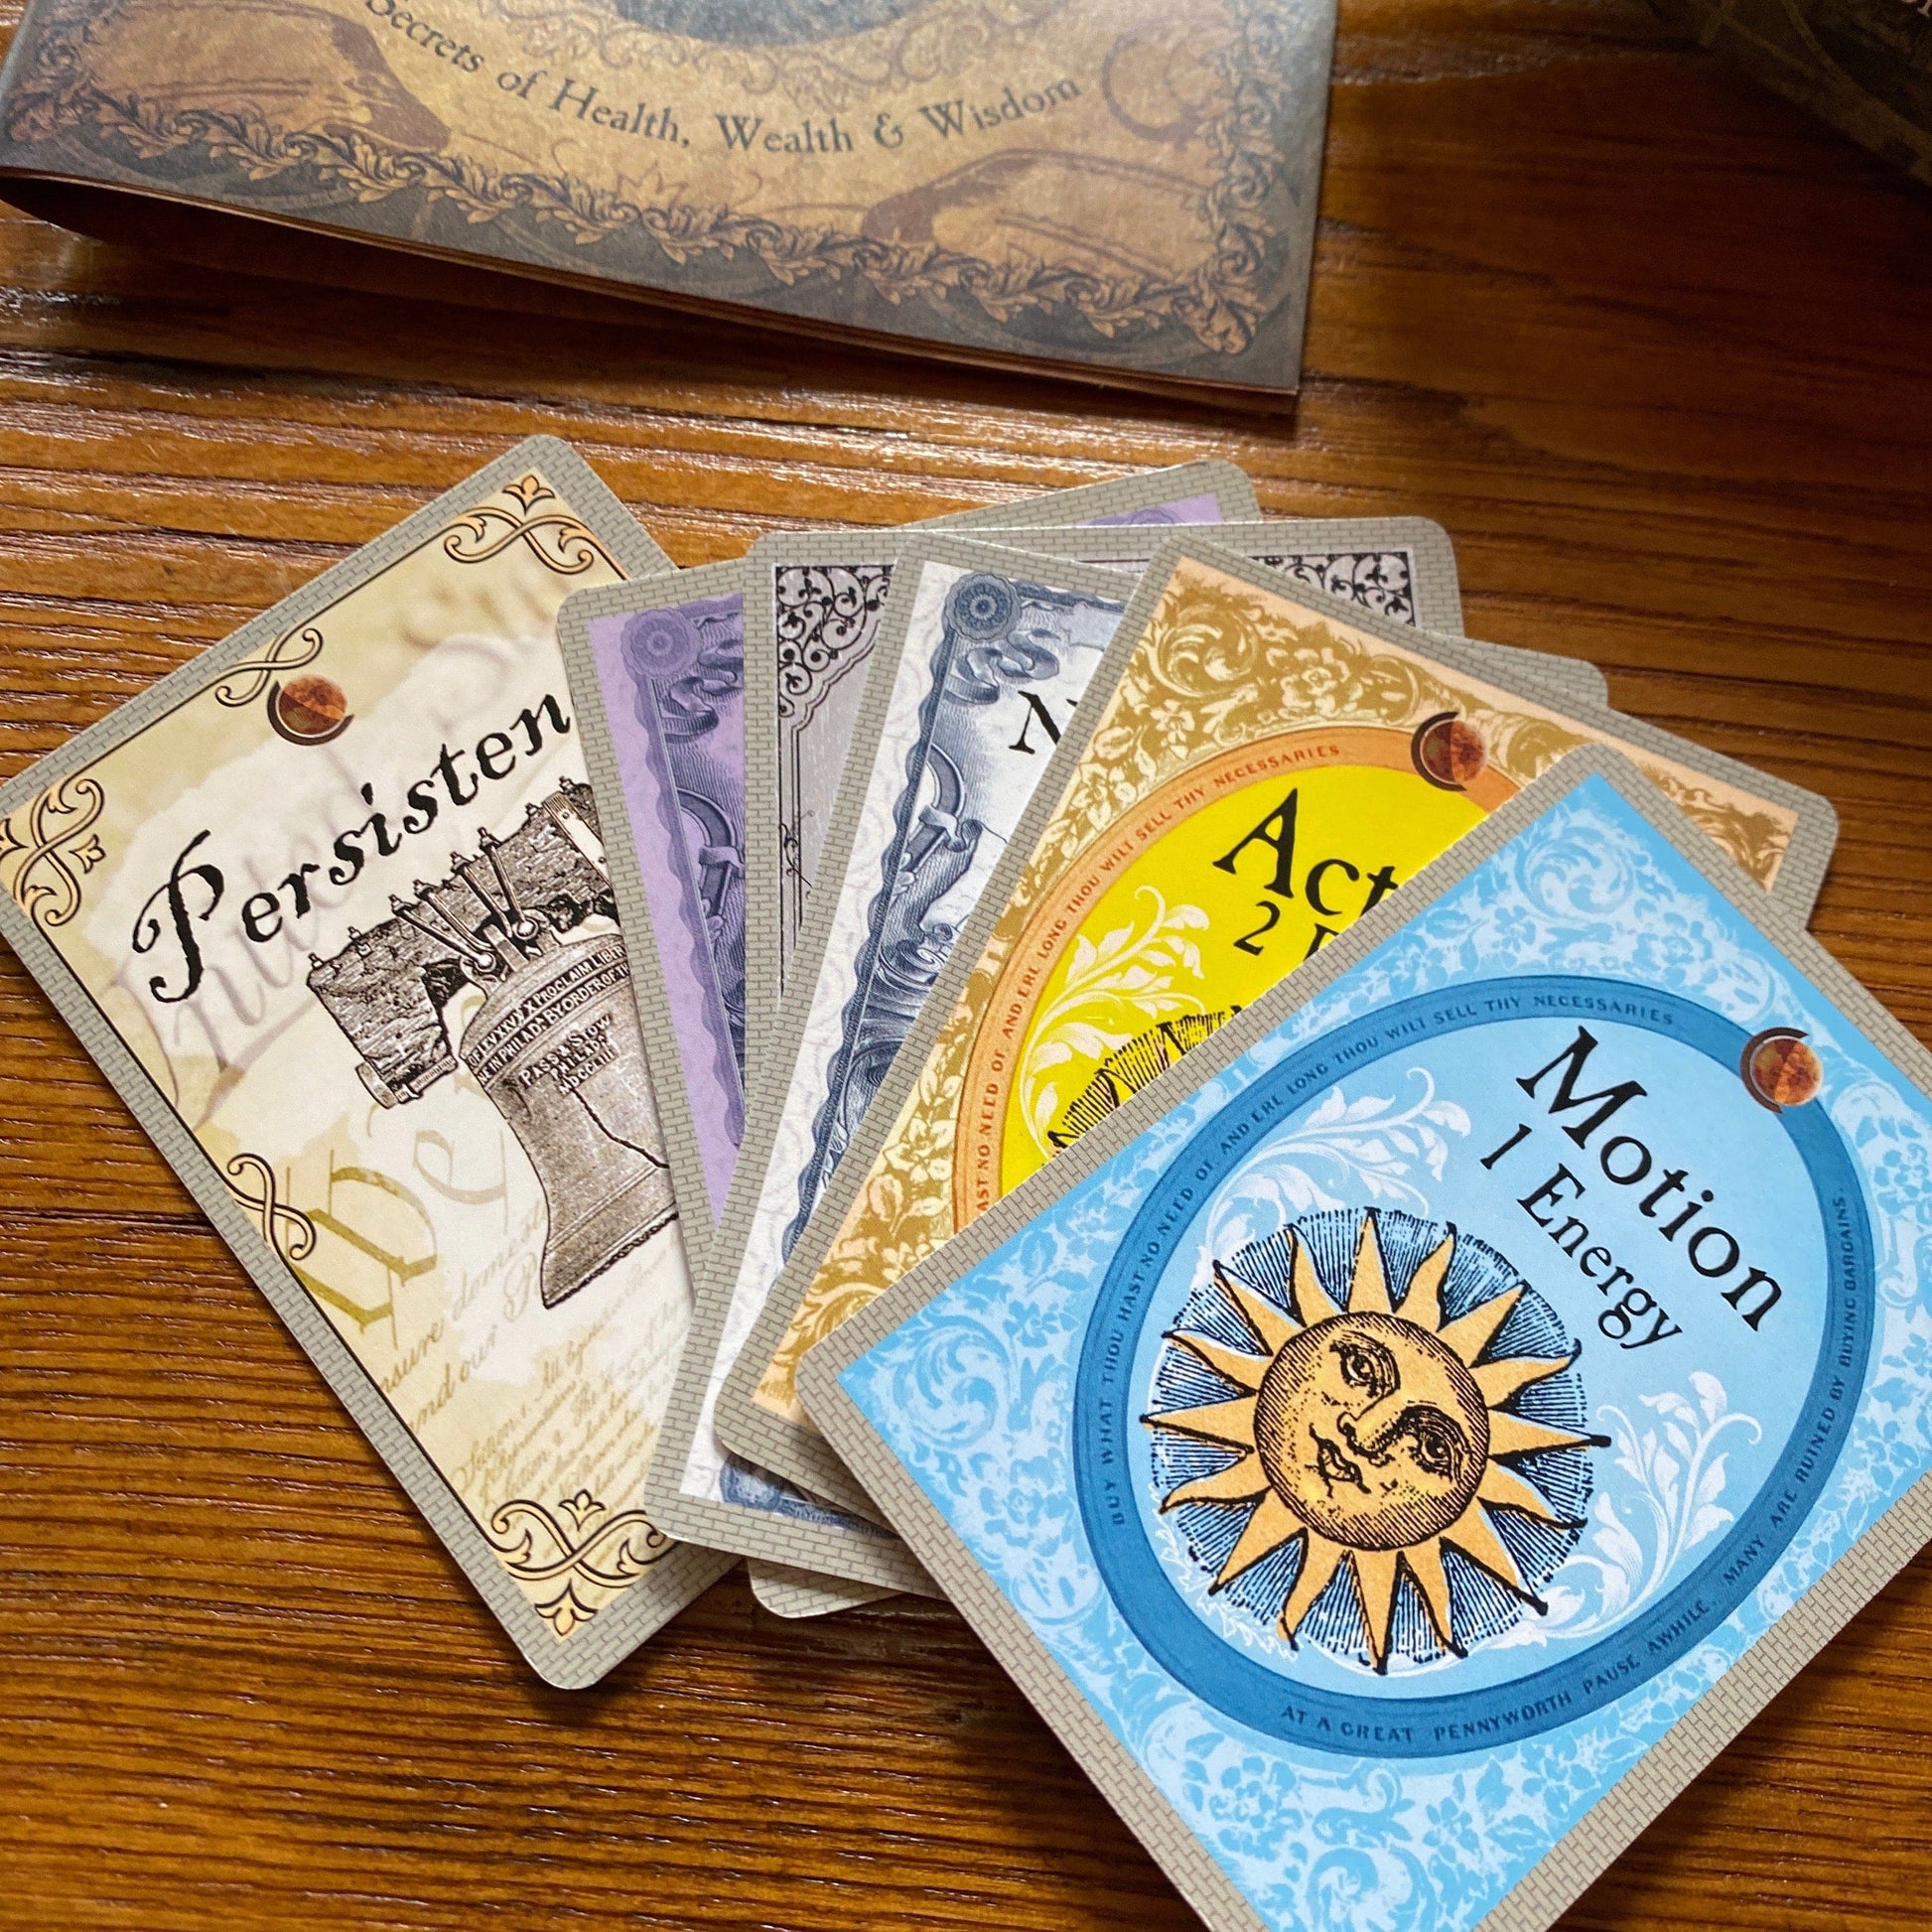 Picture of cards from Franklin's Fortune Card Game from The History List